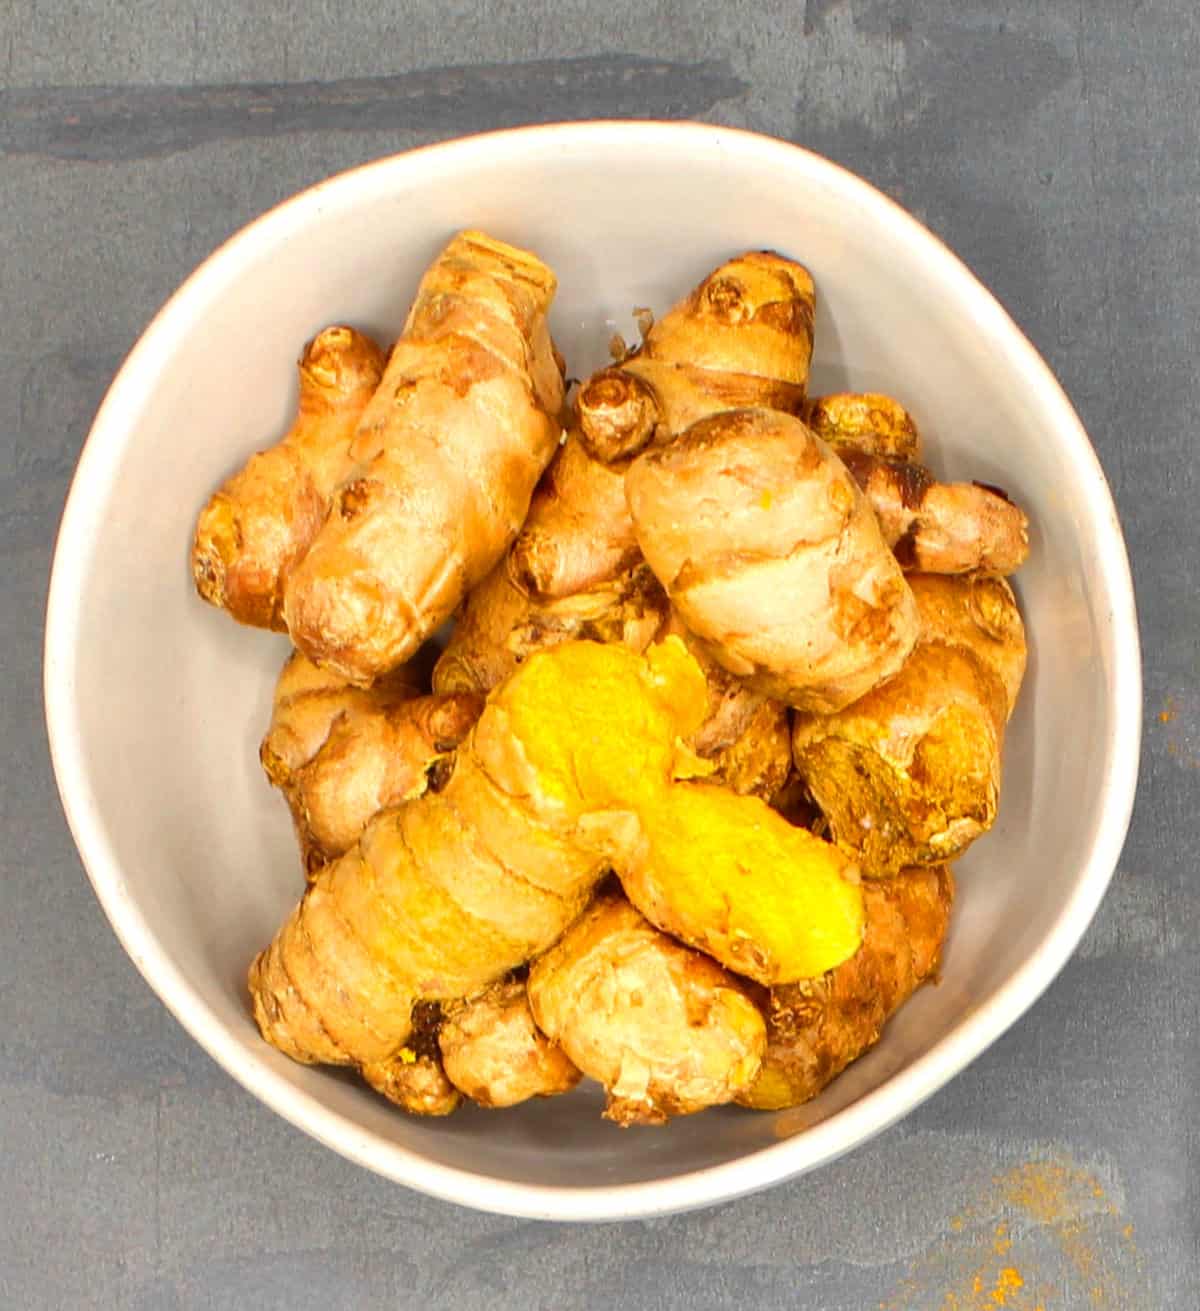 Fresh ginger root in a bowl